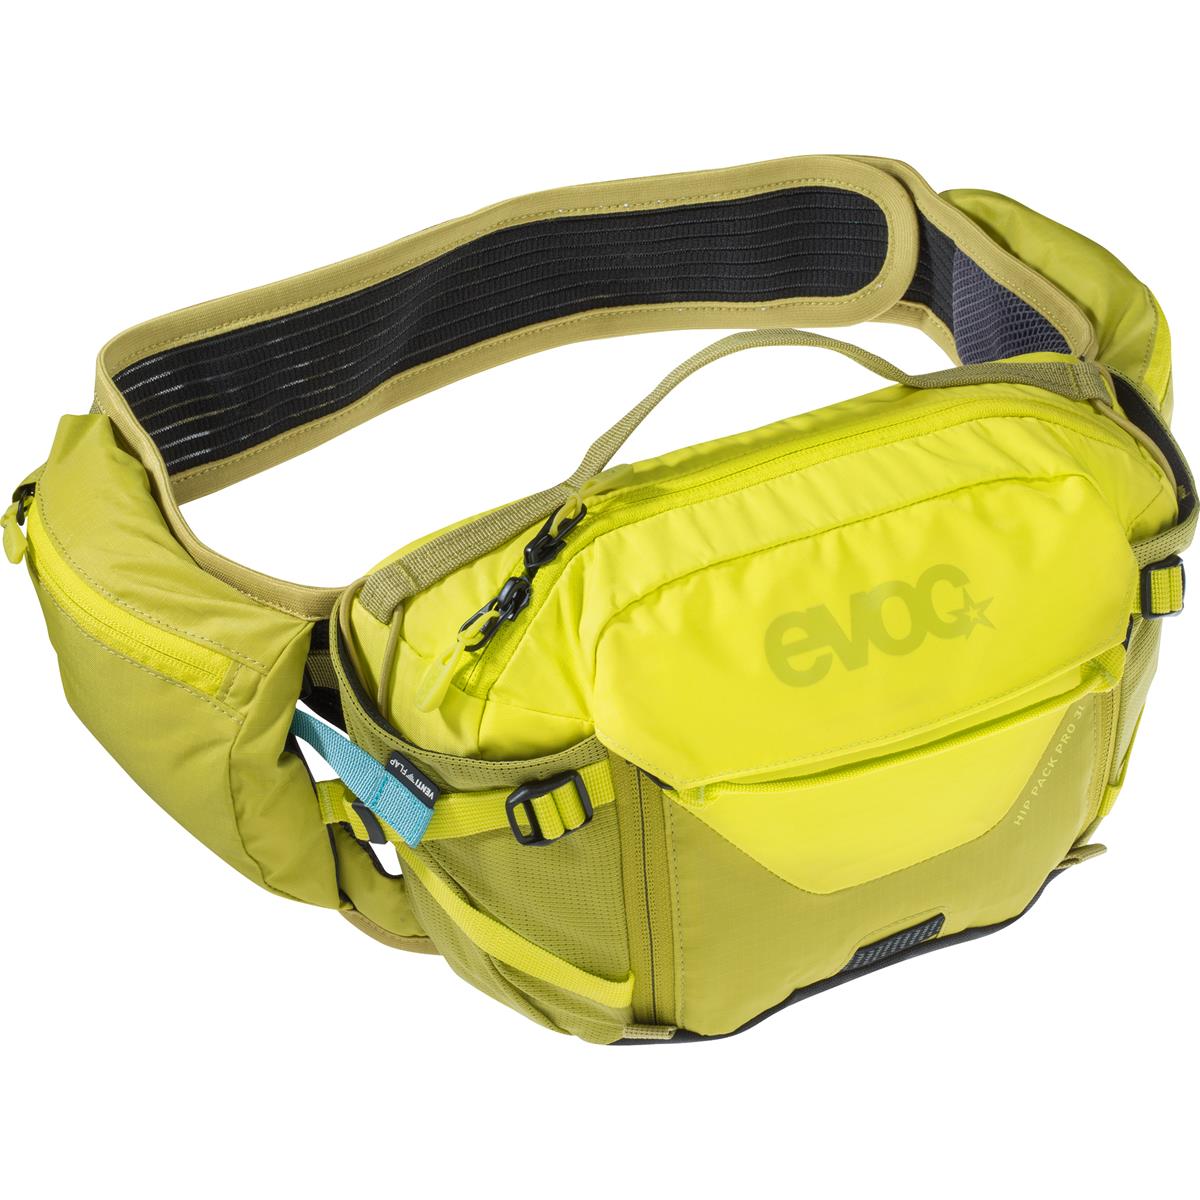 Evoc Hip Pack with Hydration System incl. 1.5 L Bladder Hip Pack Pro 3 L Sulphur/Moss Green